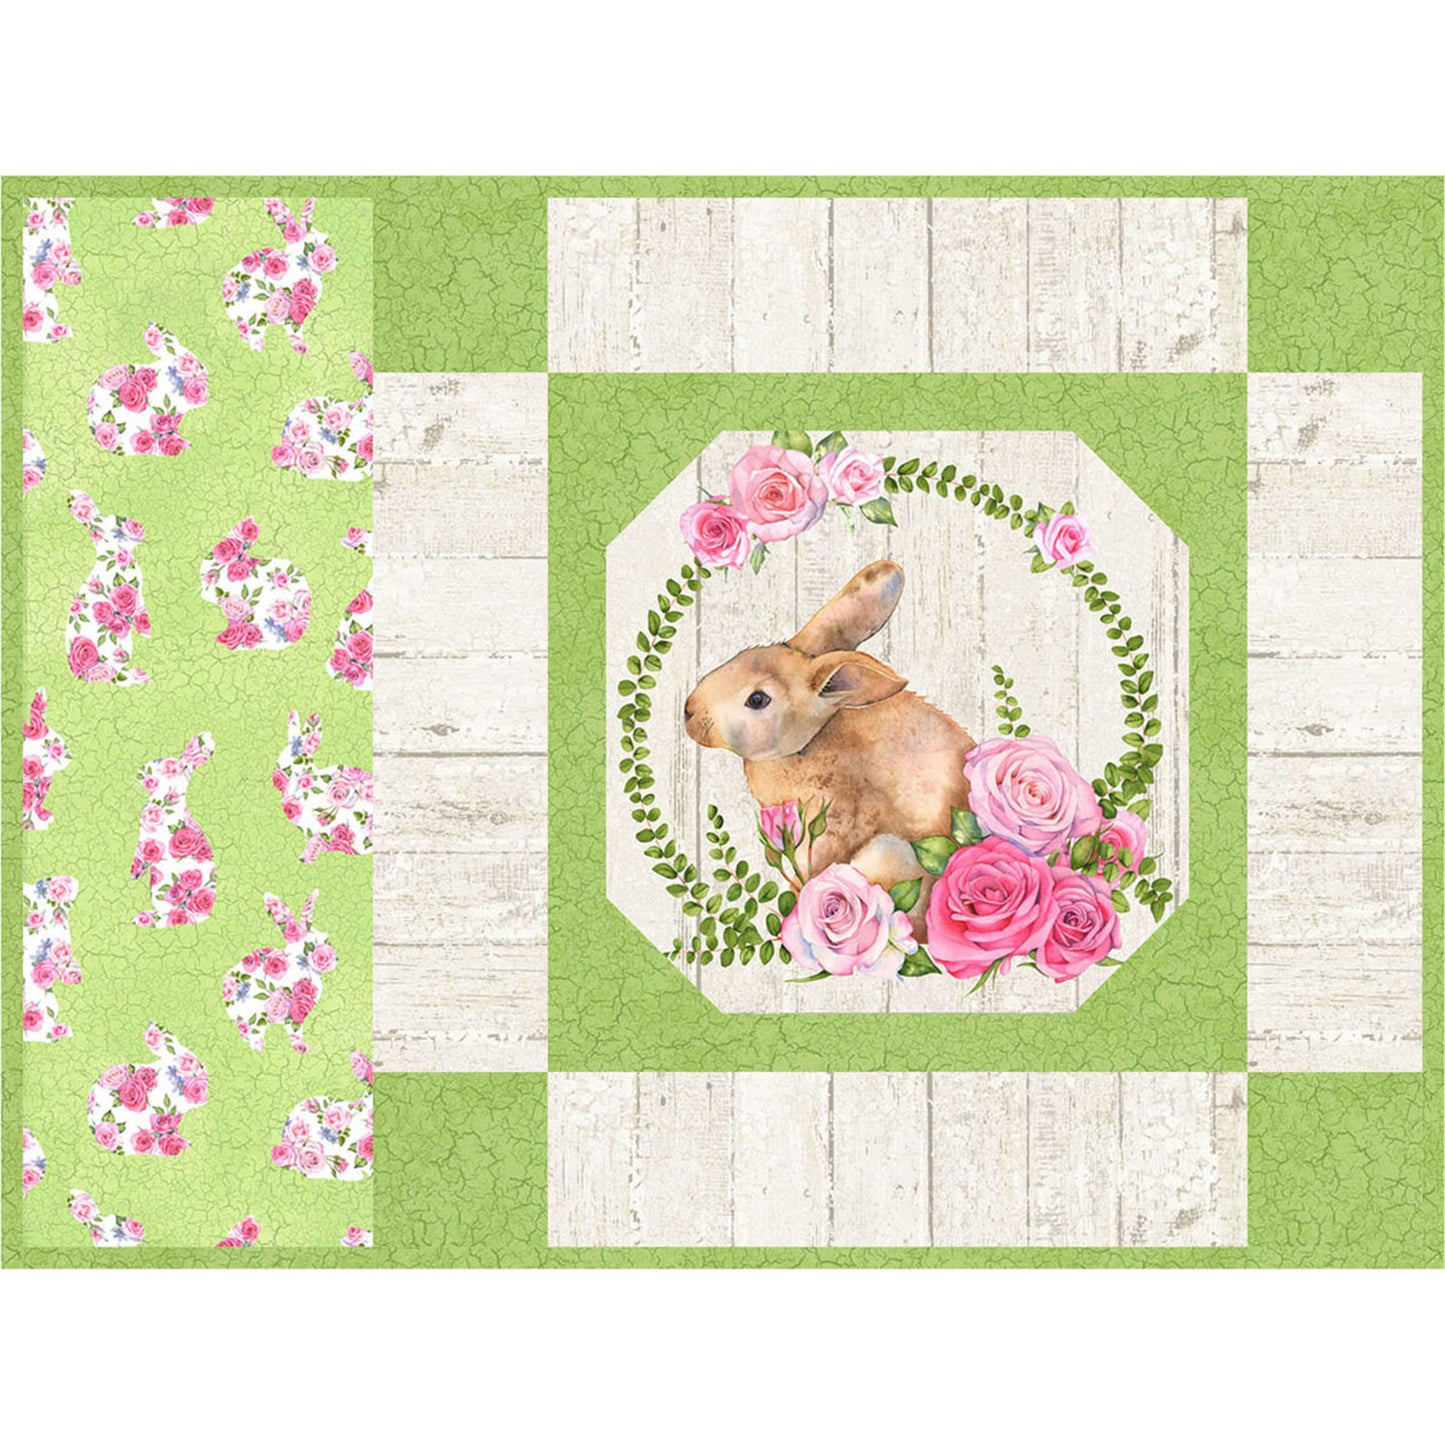 Green and white placemat with bunny and flowers design.